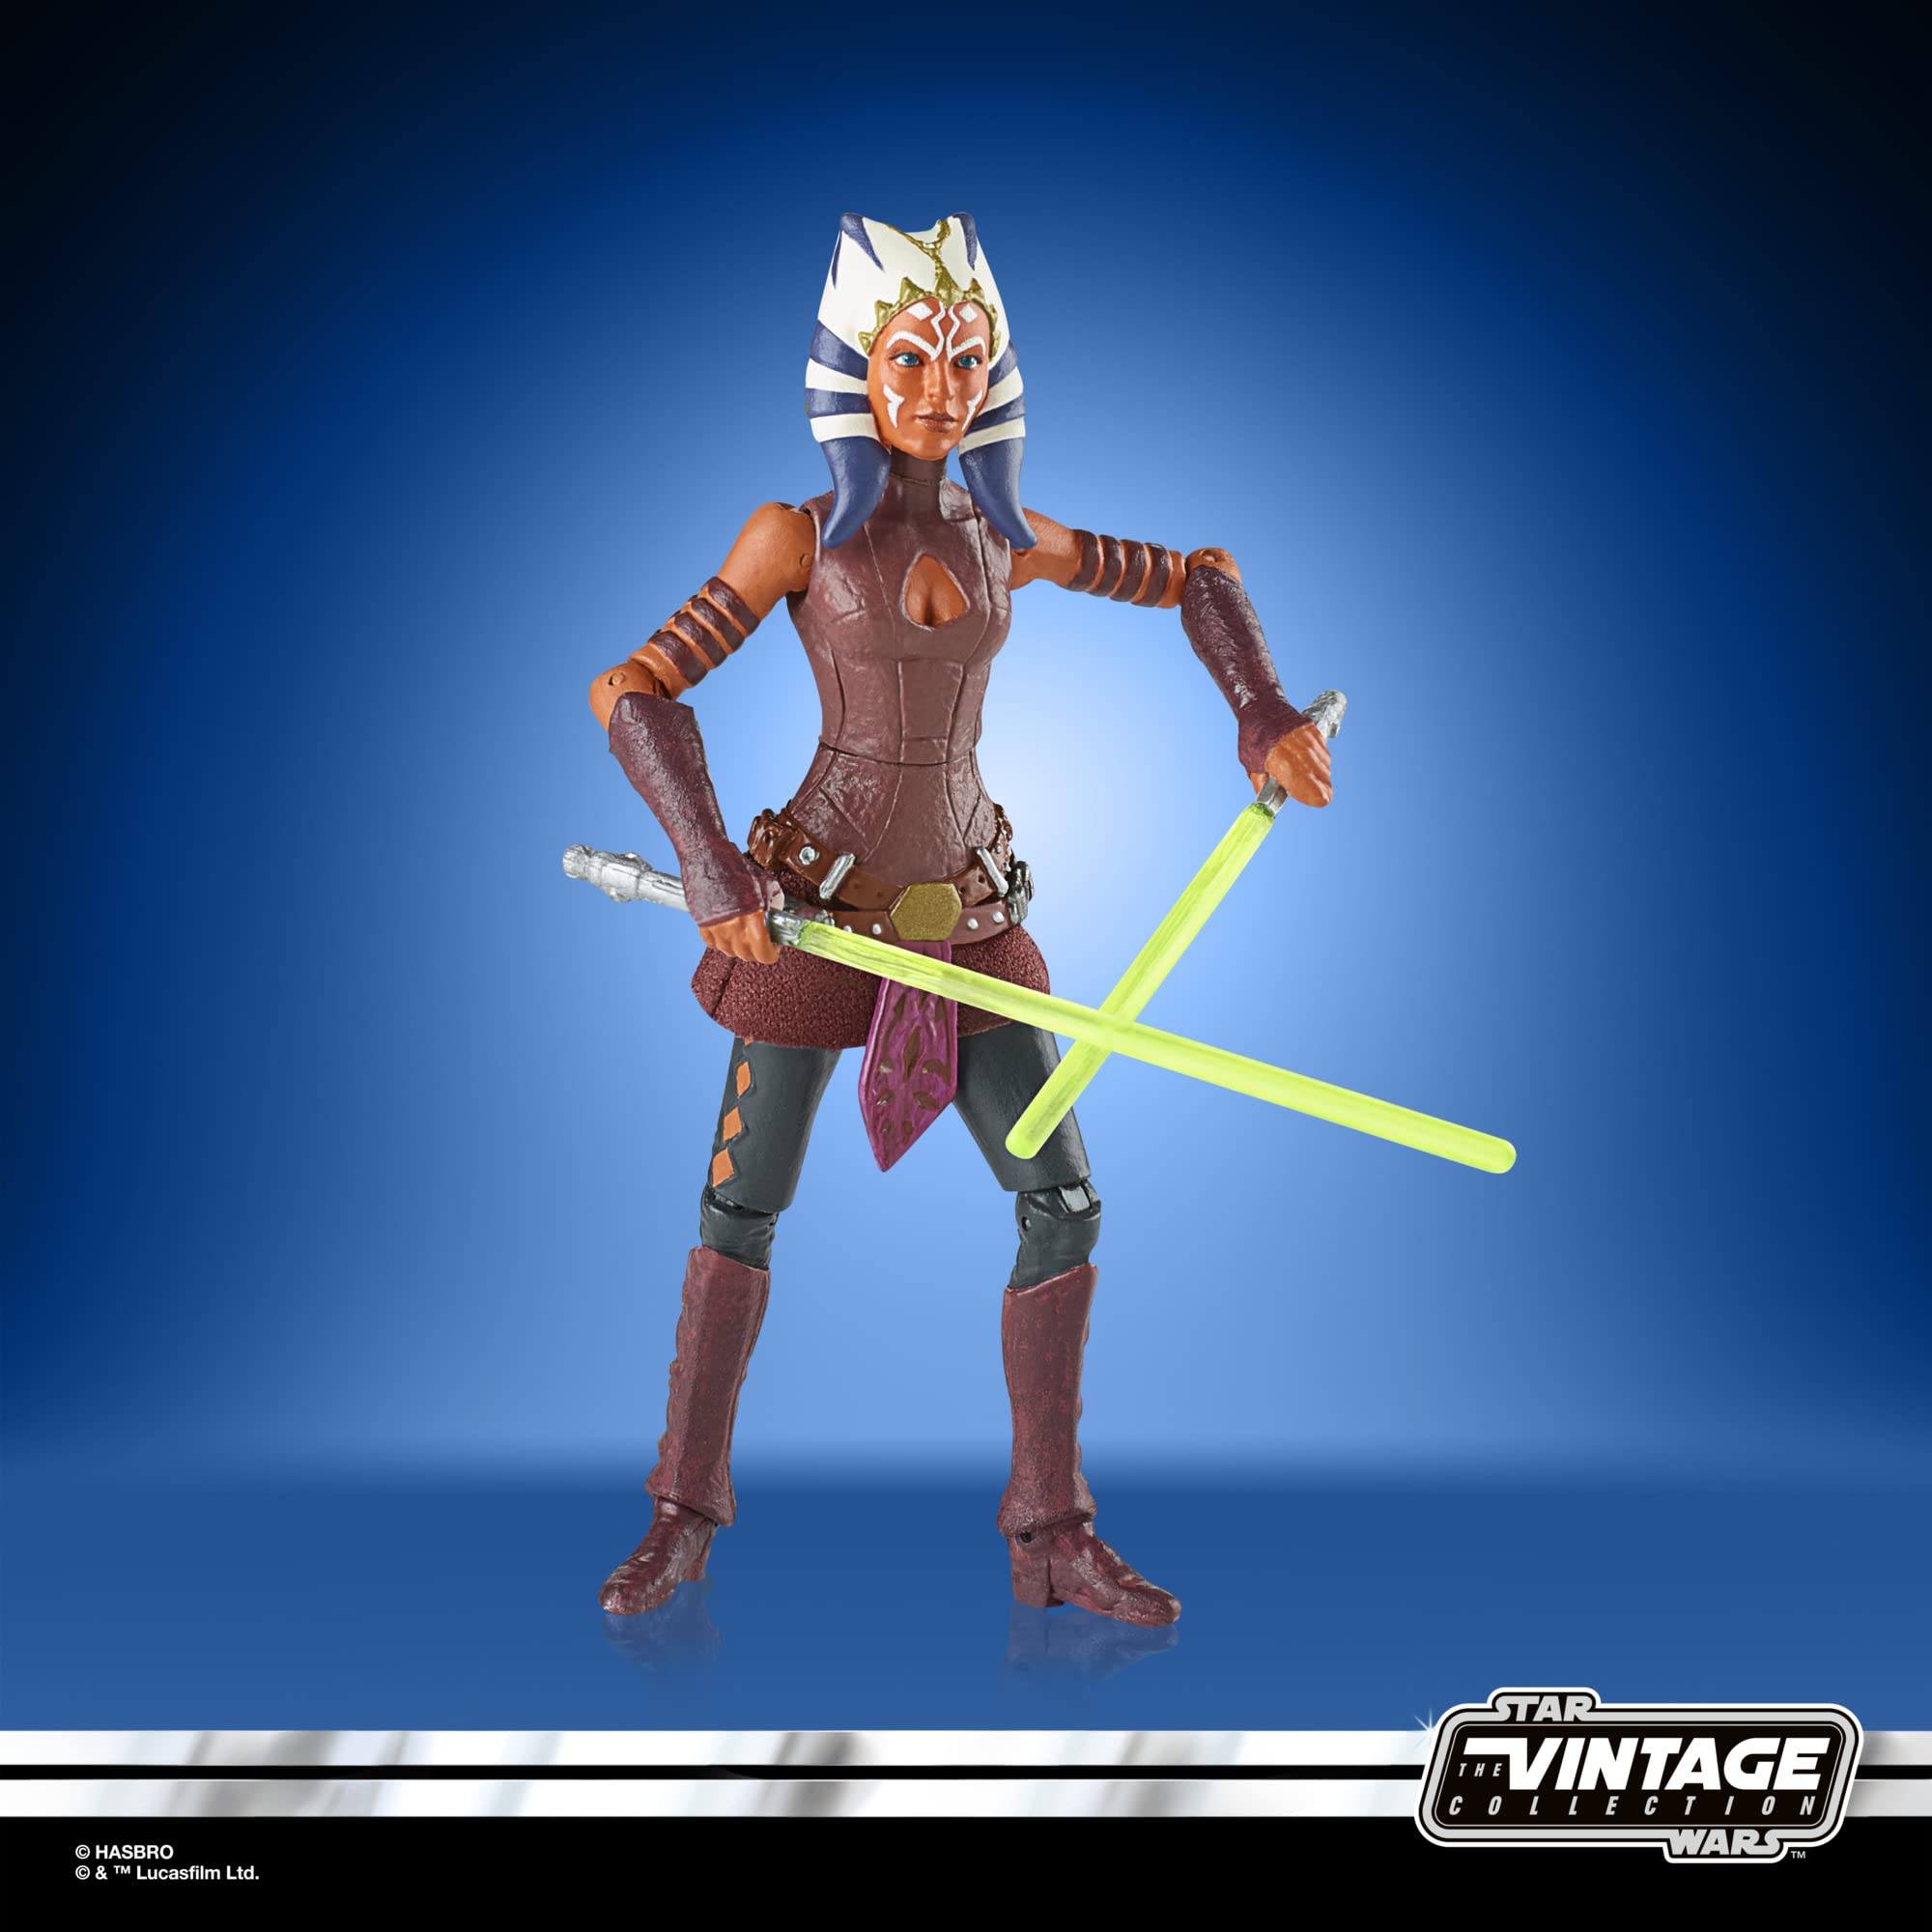 STAR WARS Hasbro The Vintage Collection Ahsoka Toy VC102, 3.75-Inch-Scale The Clone Wars Collectible Action Figure, Kids Ages 4 and Up